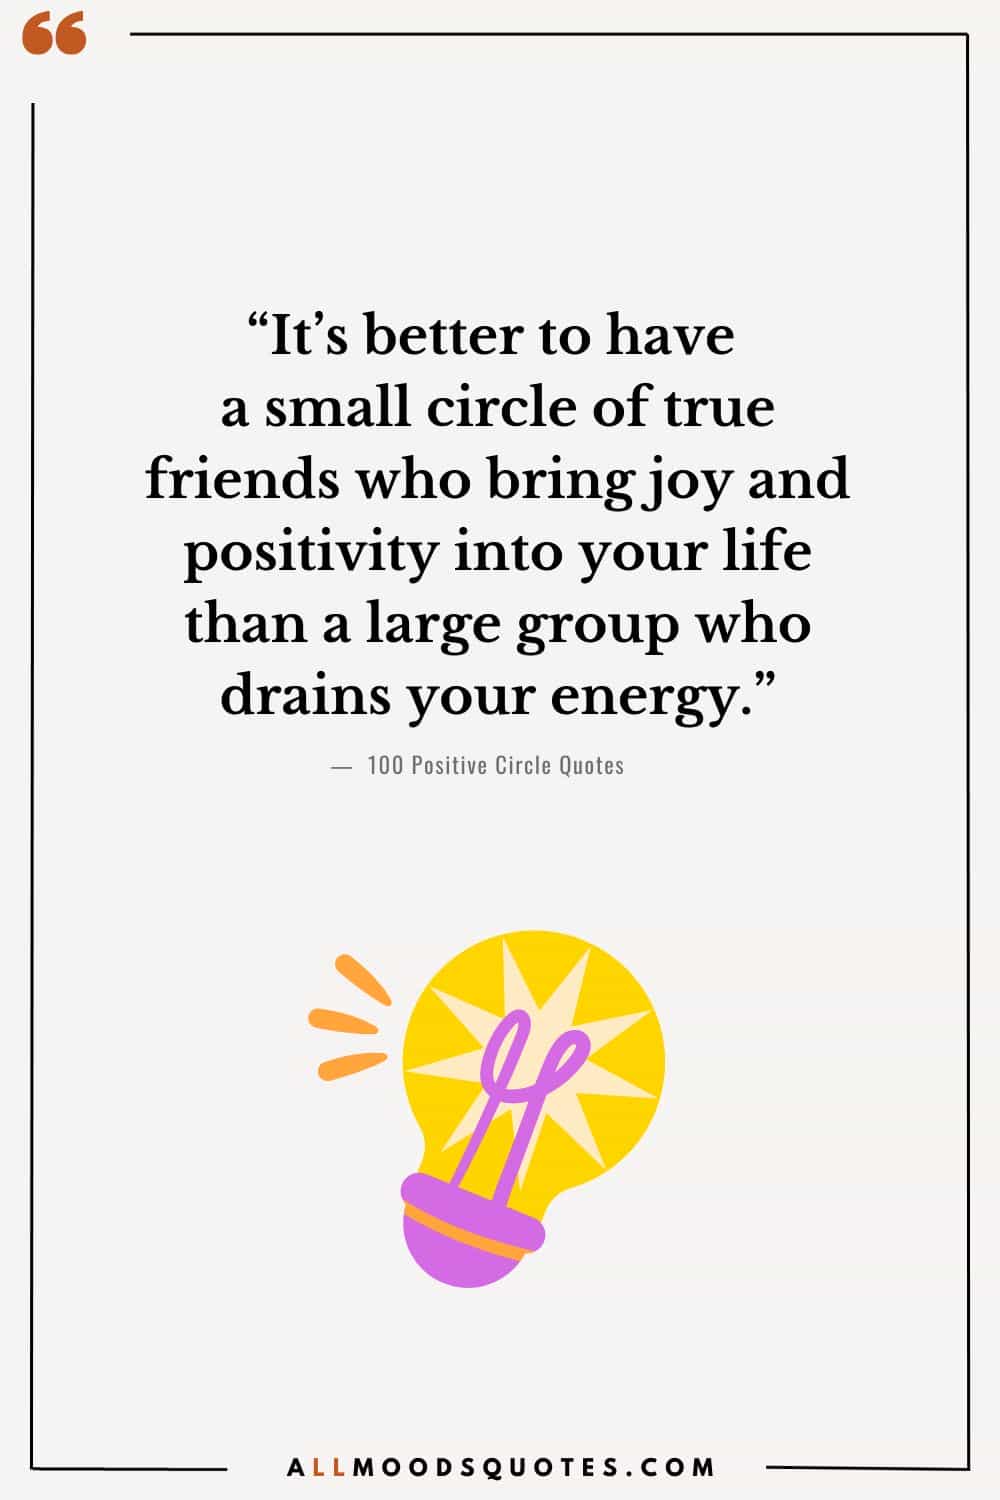 “It’s better to have a small circle of true friends who bring joy and positivity into your life than a large group who drains your energy.”